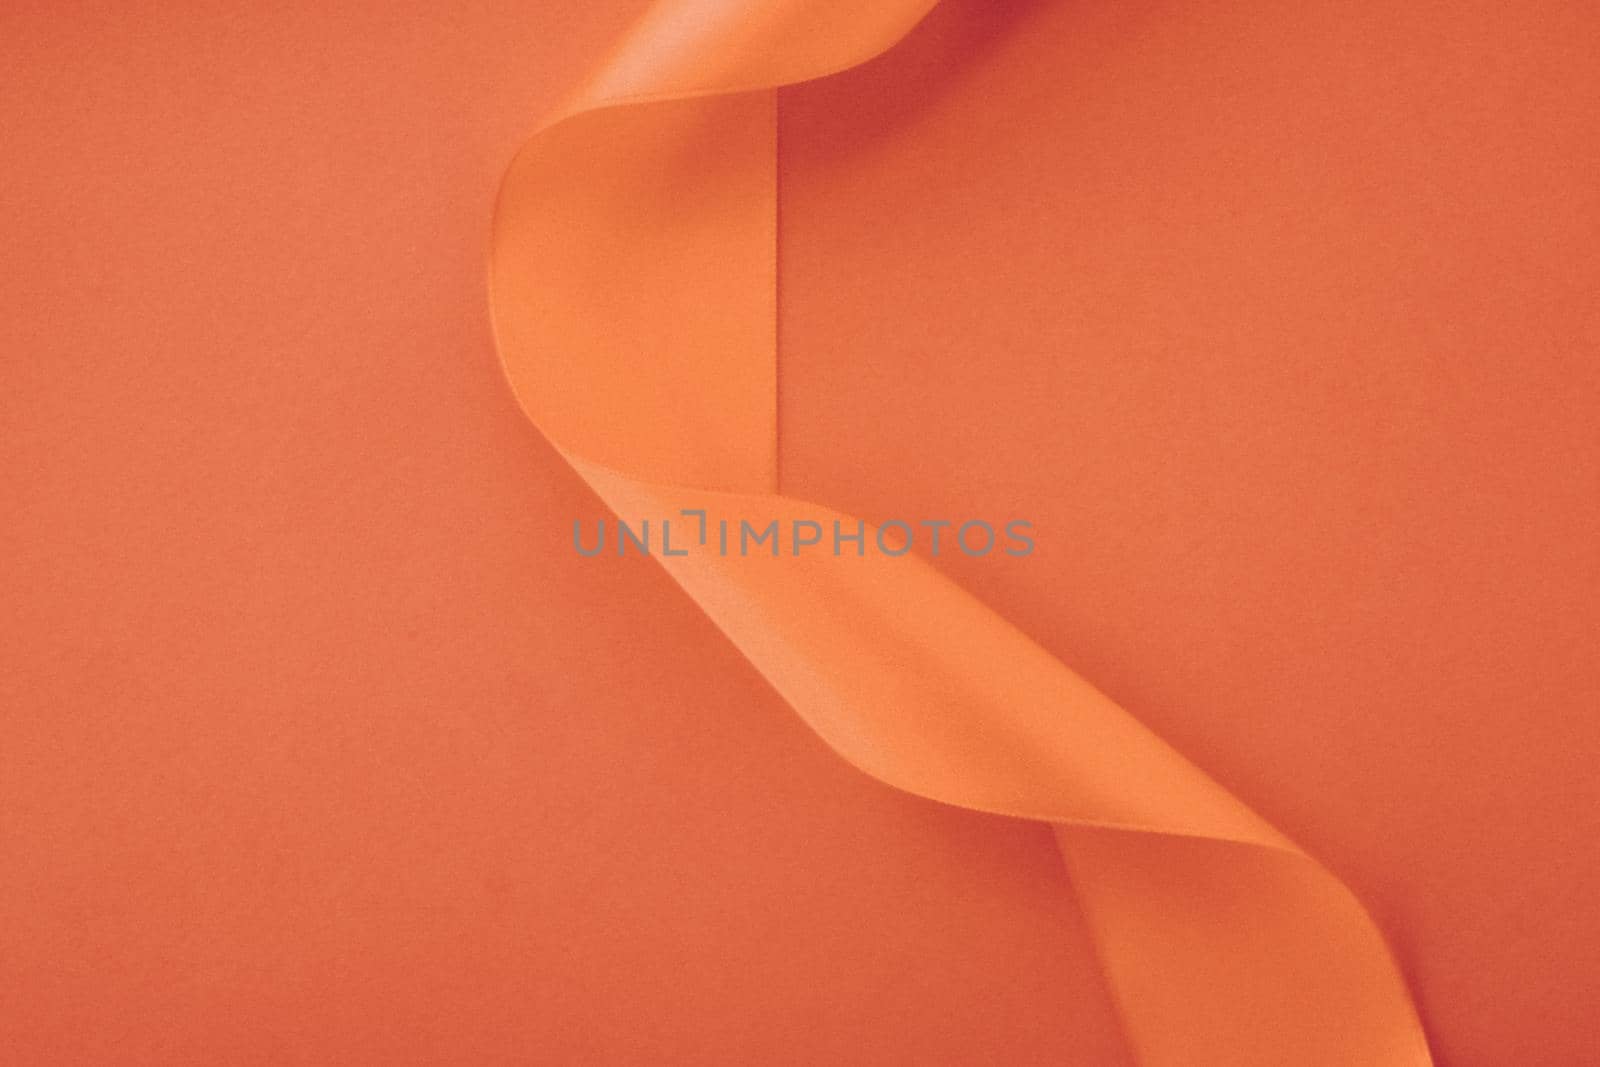 Abstract curly silk ribbon on orange background, exclusive luxury brand design for holiday sale product promotion and glamour art invitation card backdrop by Anneleven